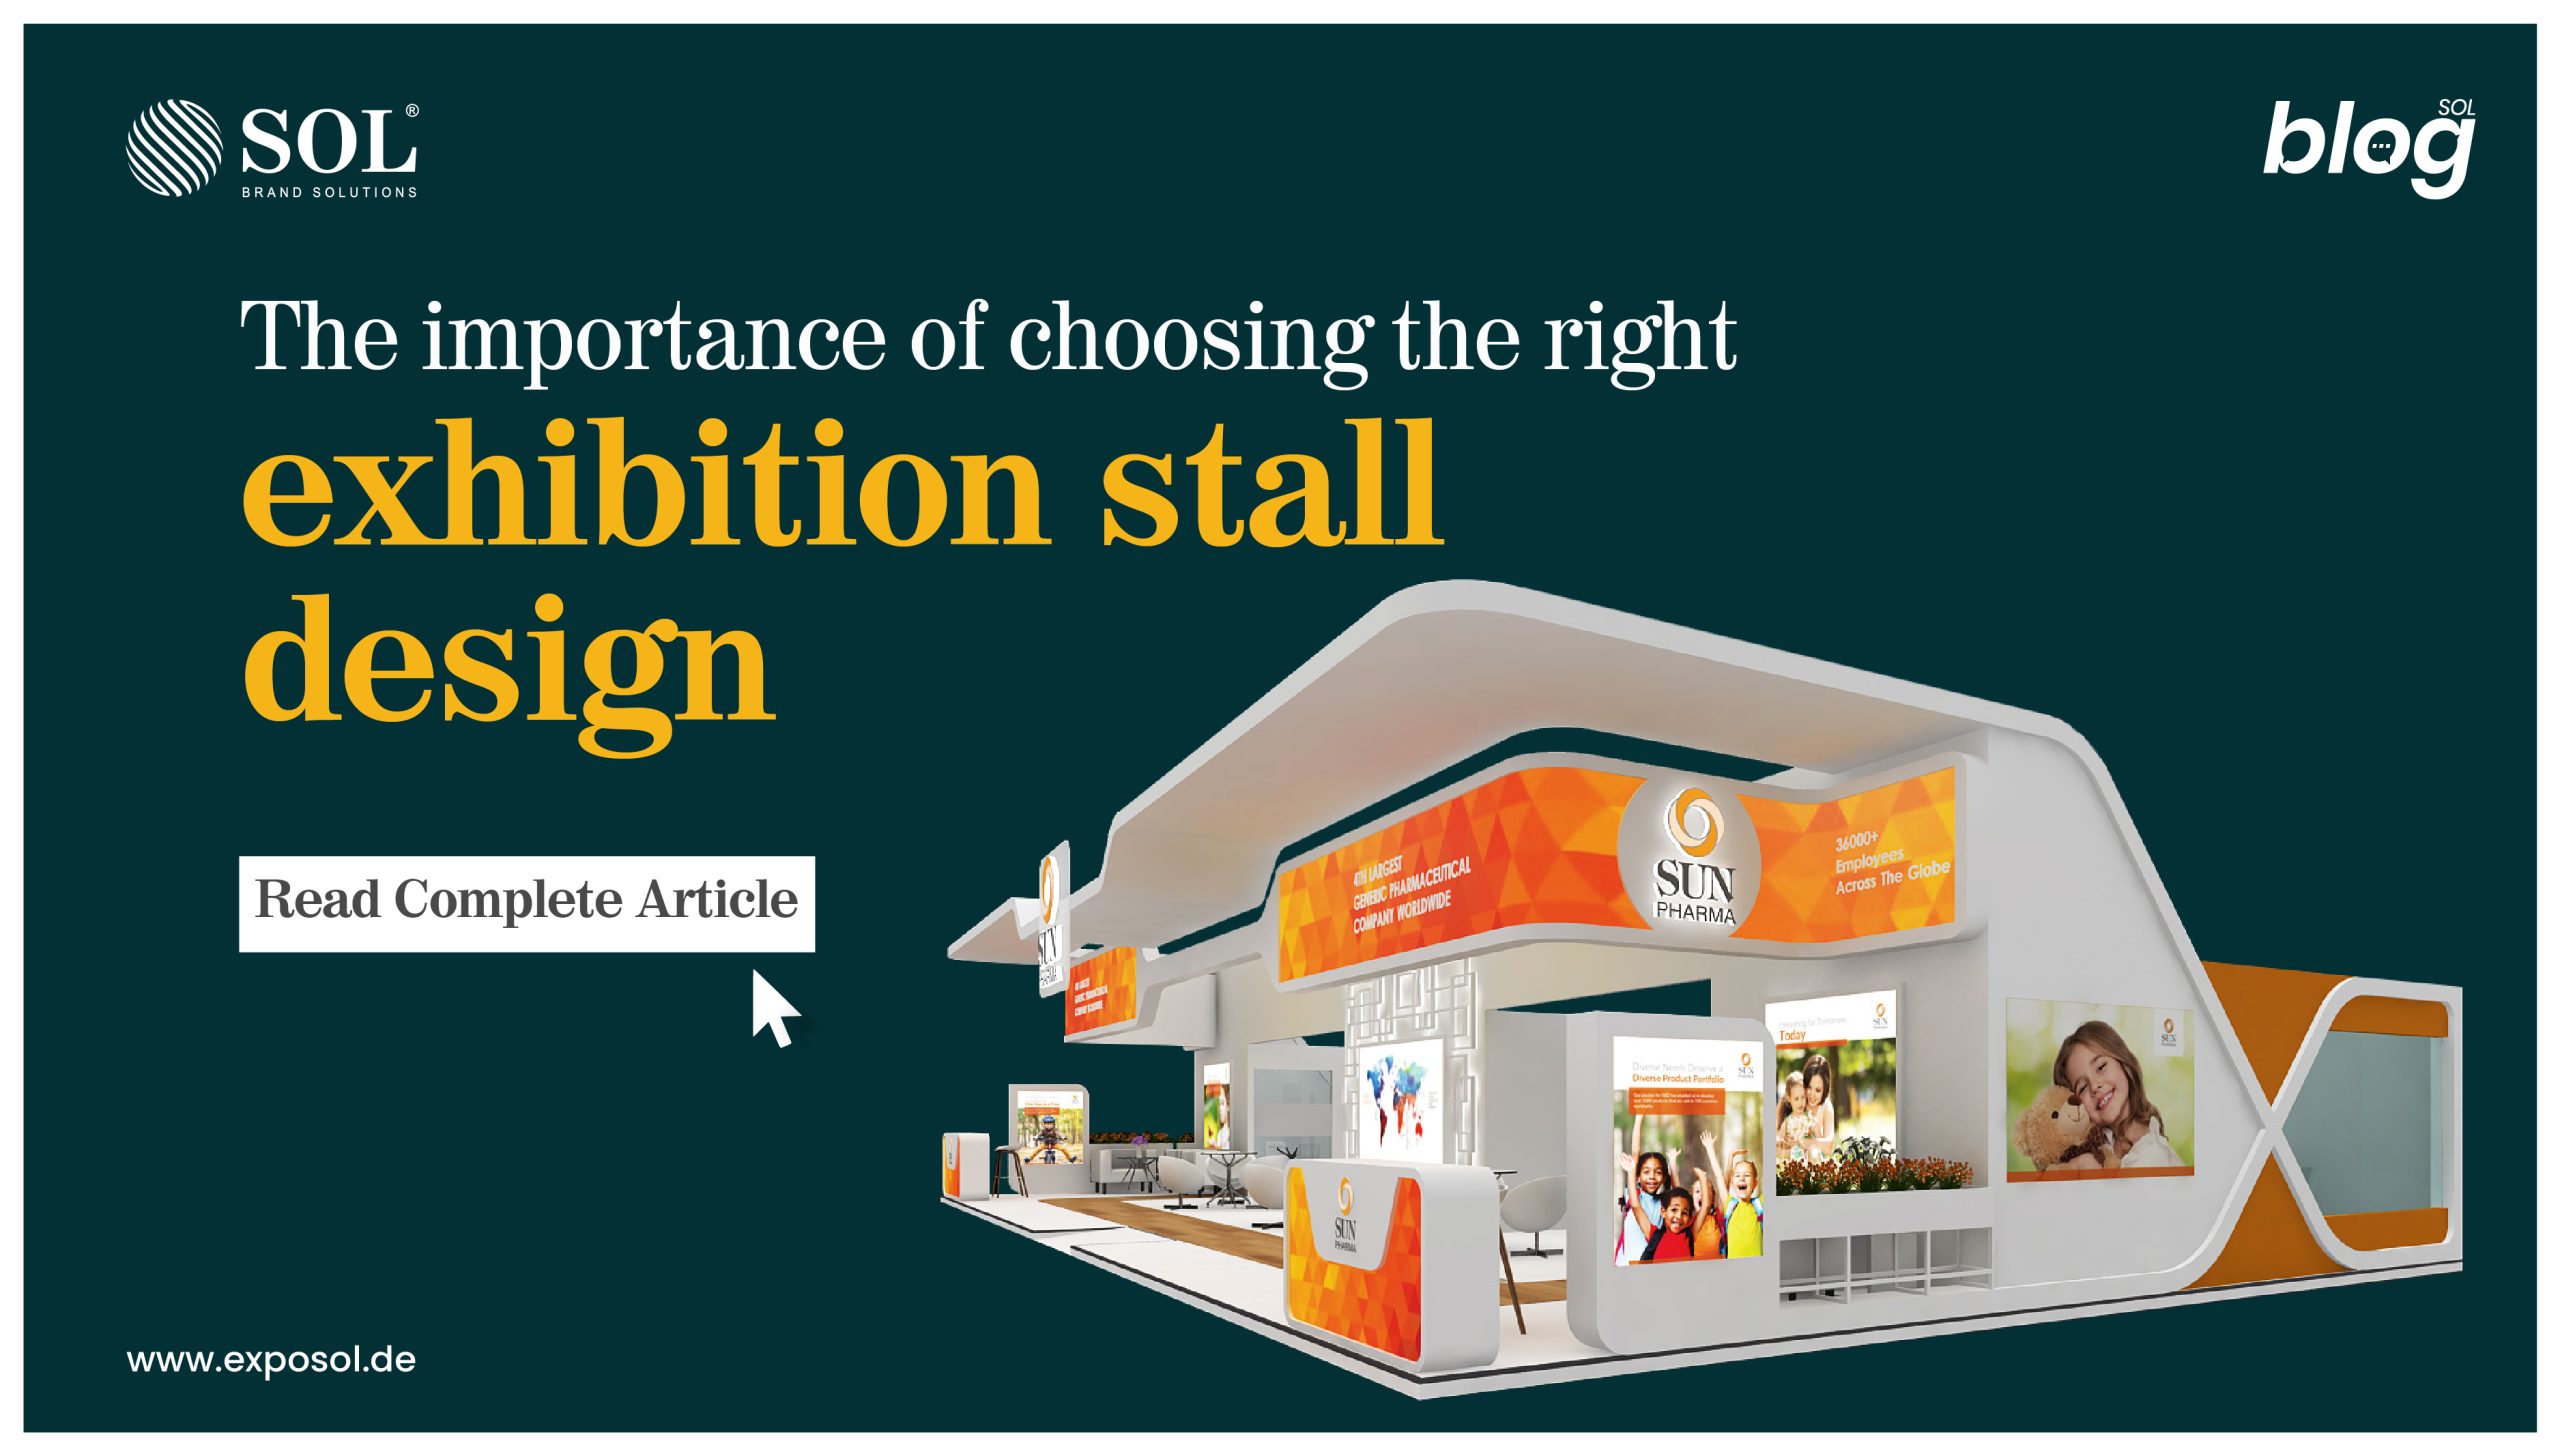 THE IMPORTANCE OF CHOOSING THE RIGHT EXHIBITION STALL DESIGN